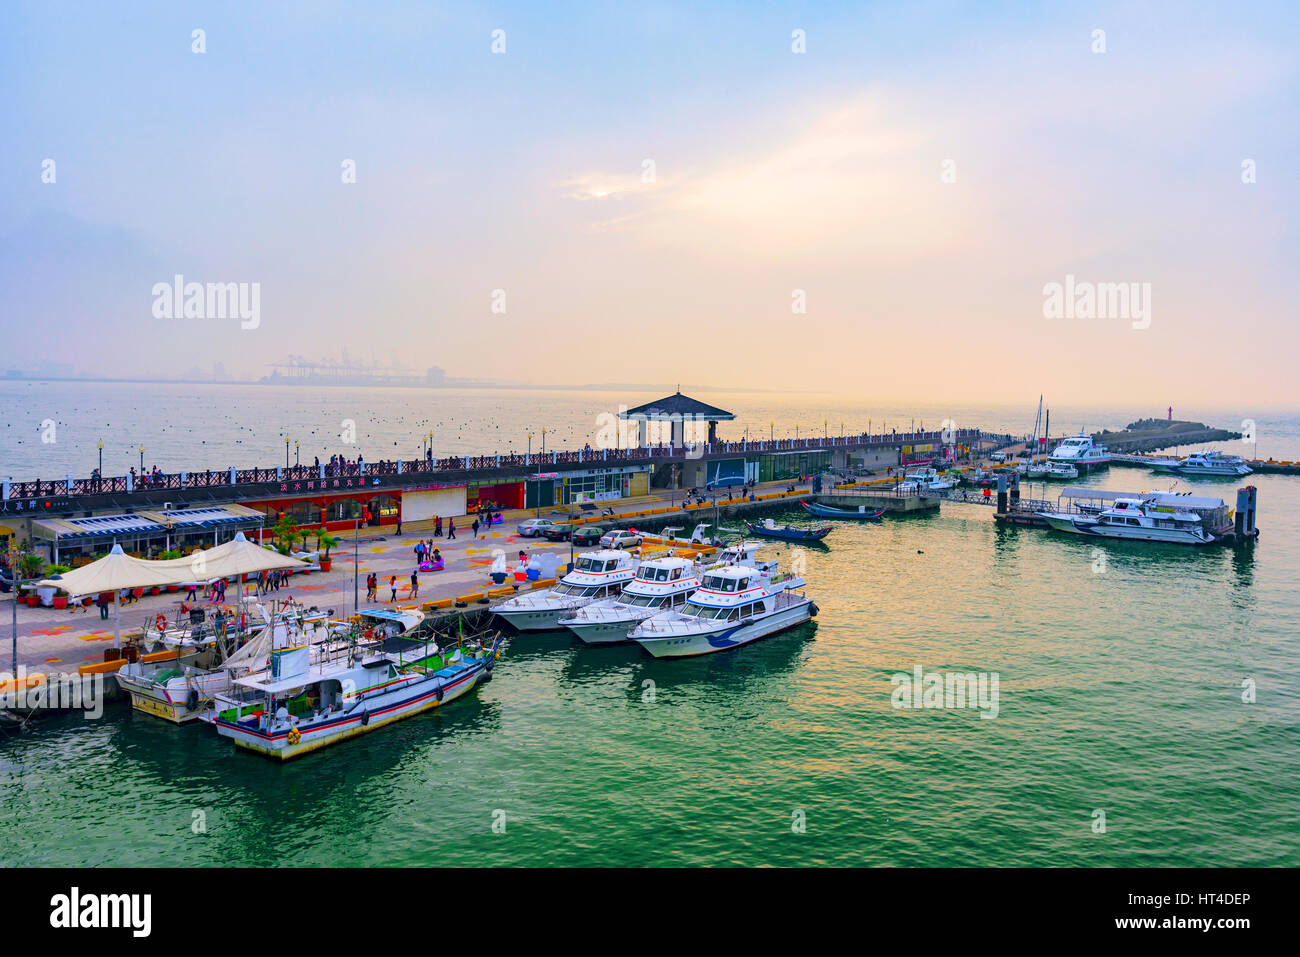 TAIPEI, TAIWAN - JANUARY 05: View of Fisherman's wharf waterfront area a popular travel destination on a misty day during sunset  on January 05, 2017  Stock Photo